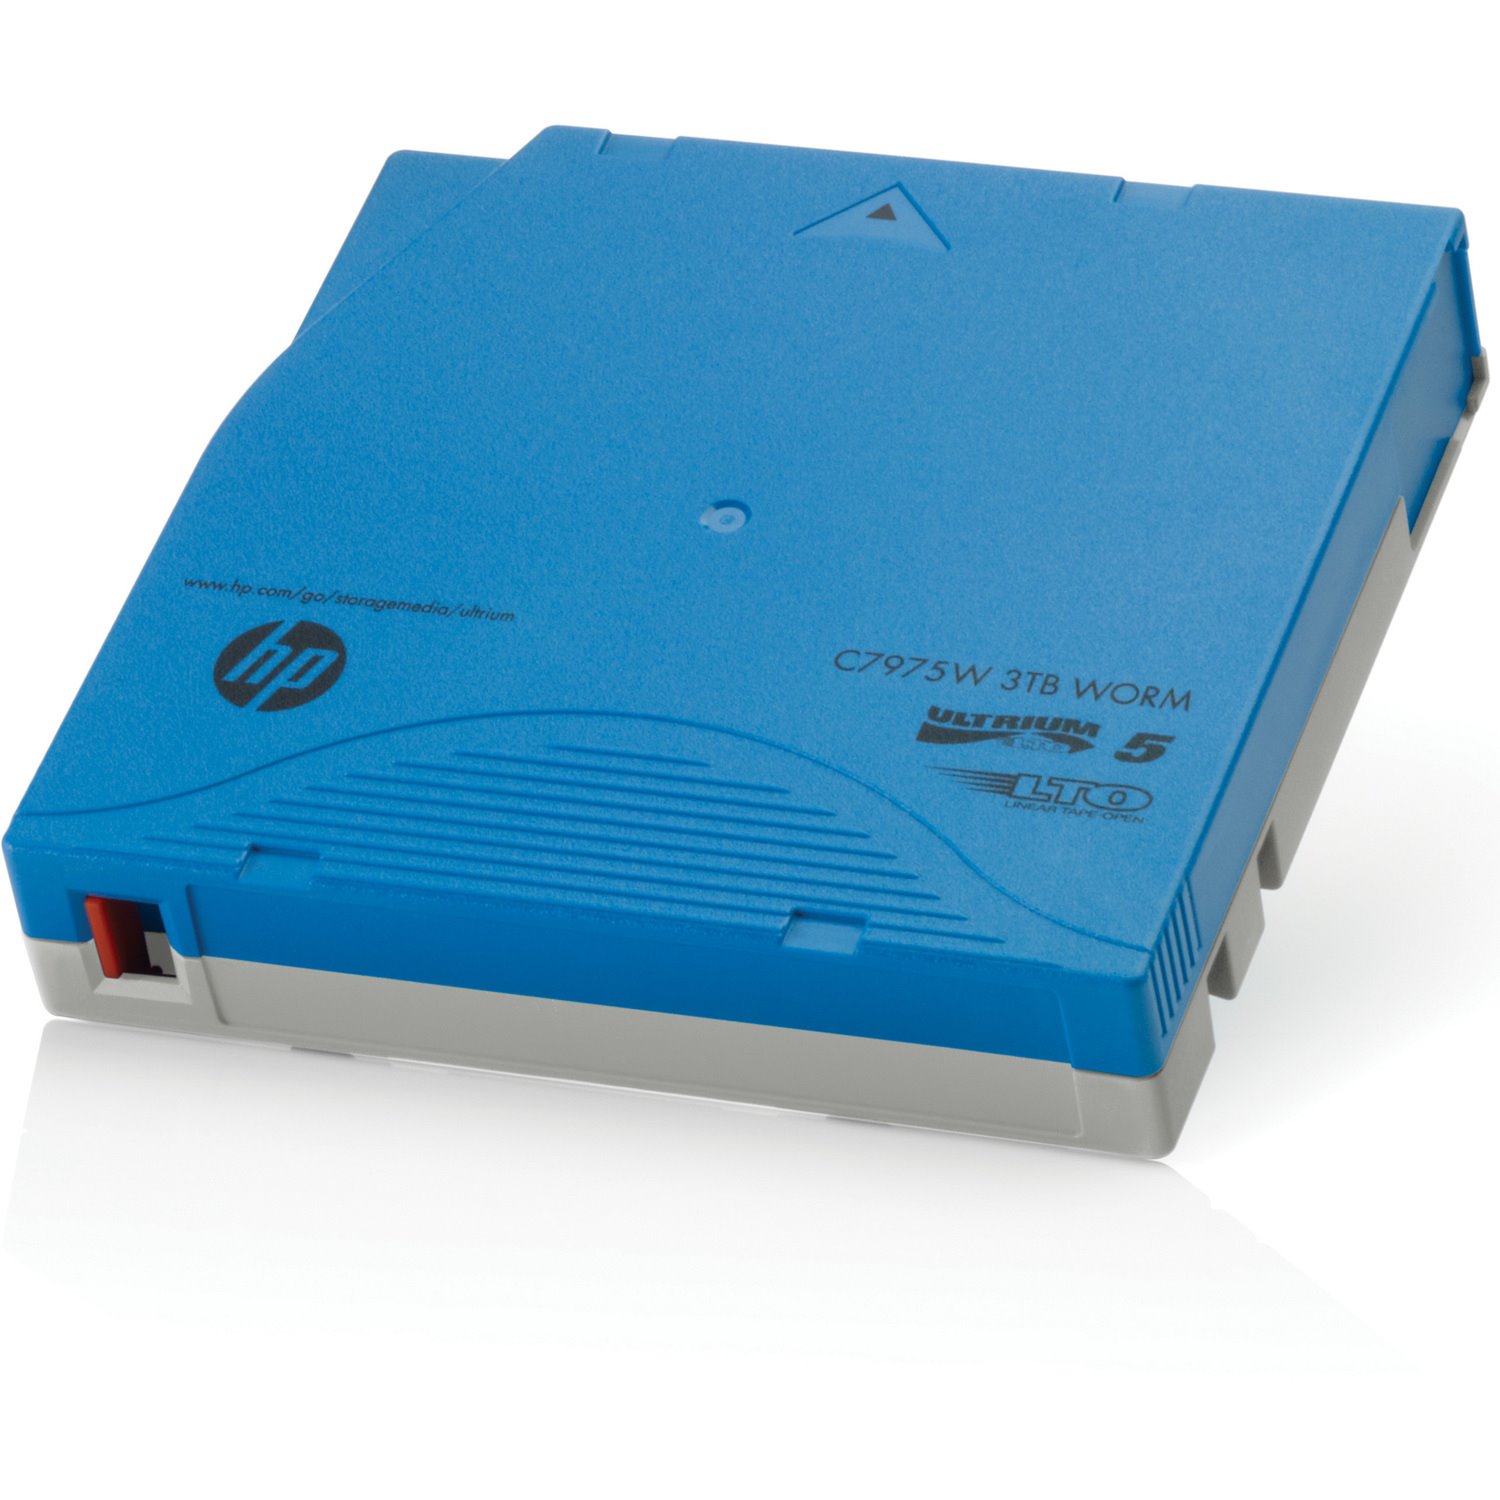 HP-IMSourcing - IMS SPARE - C7975AL LTO Ultrium 5 Data Cartridge with Custom Barcode Labeling